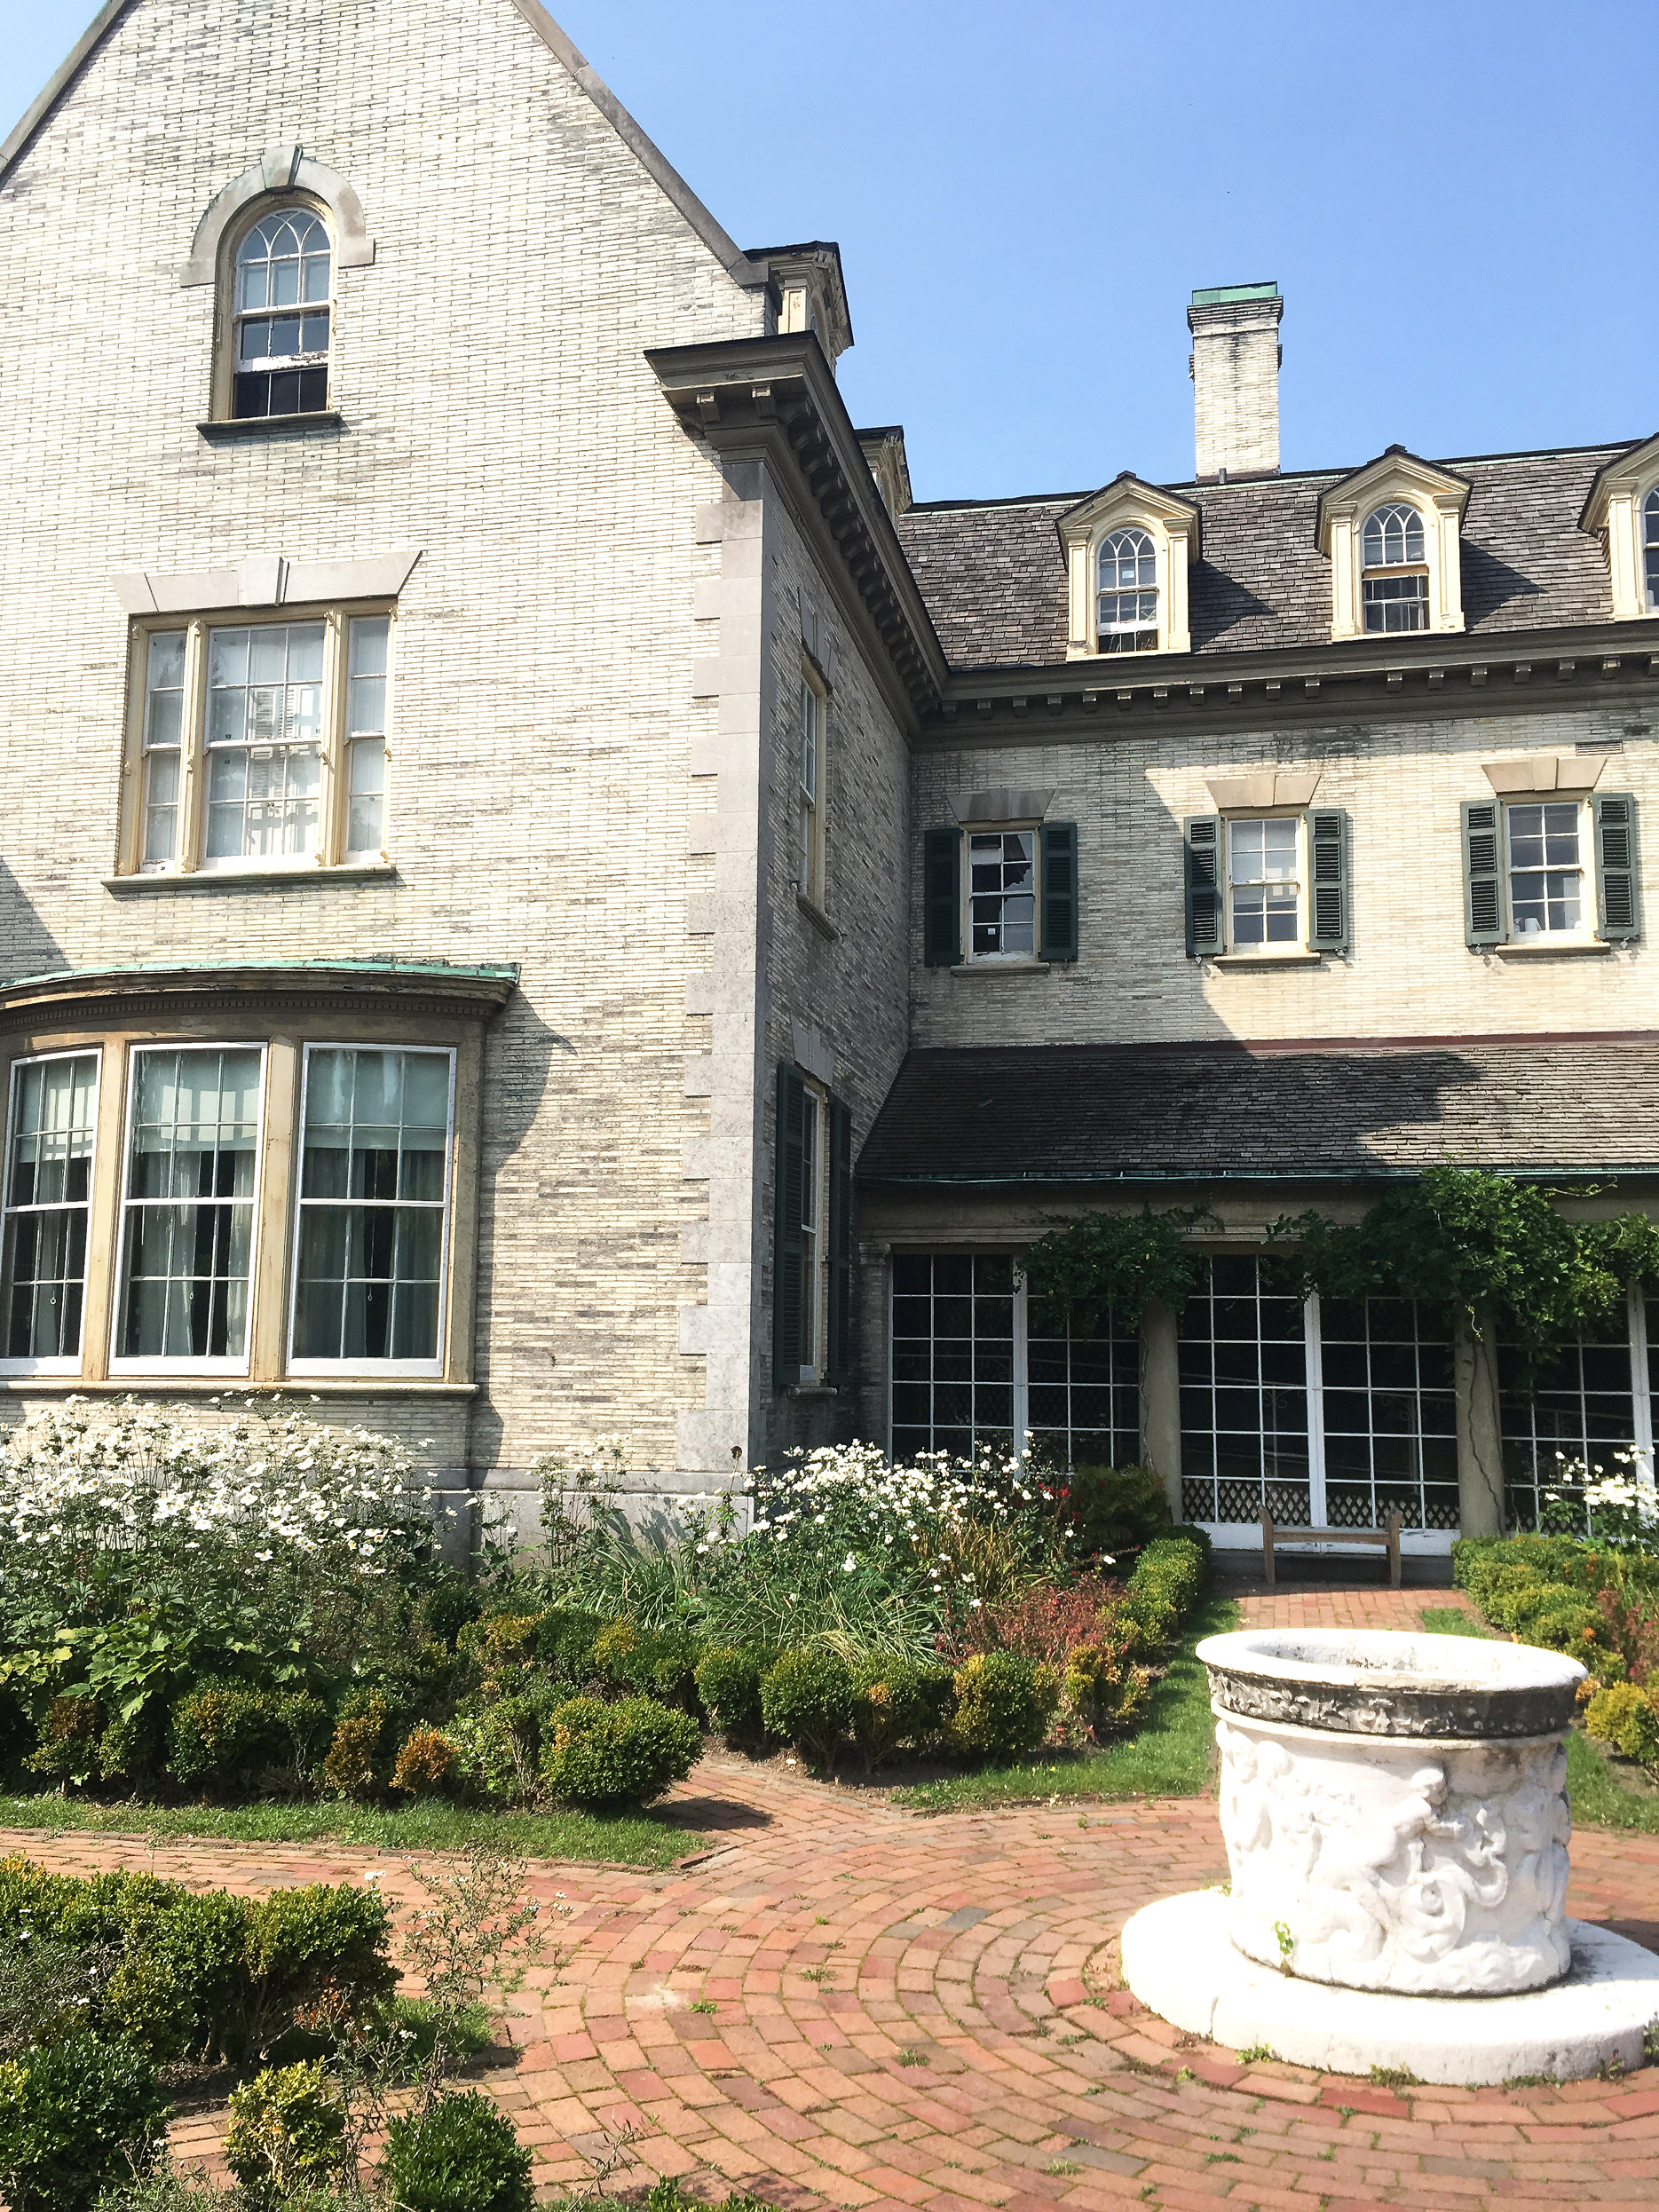 Visiting the George Eastman Mansion